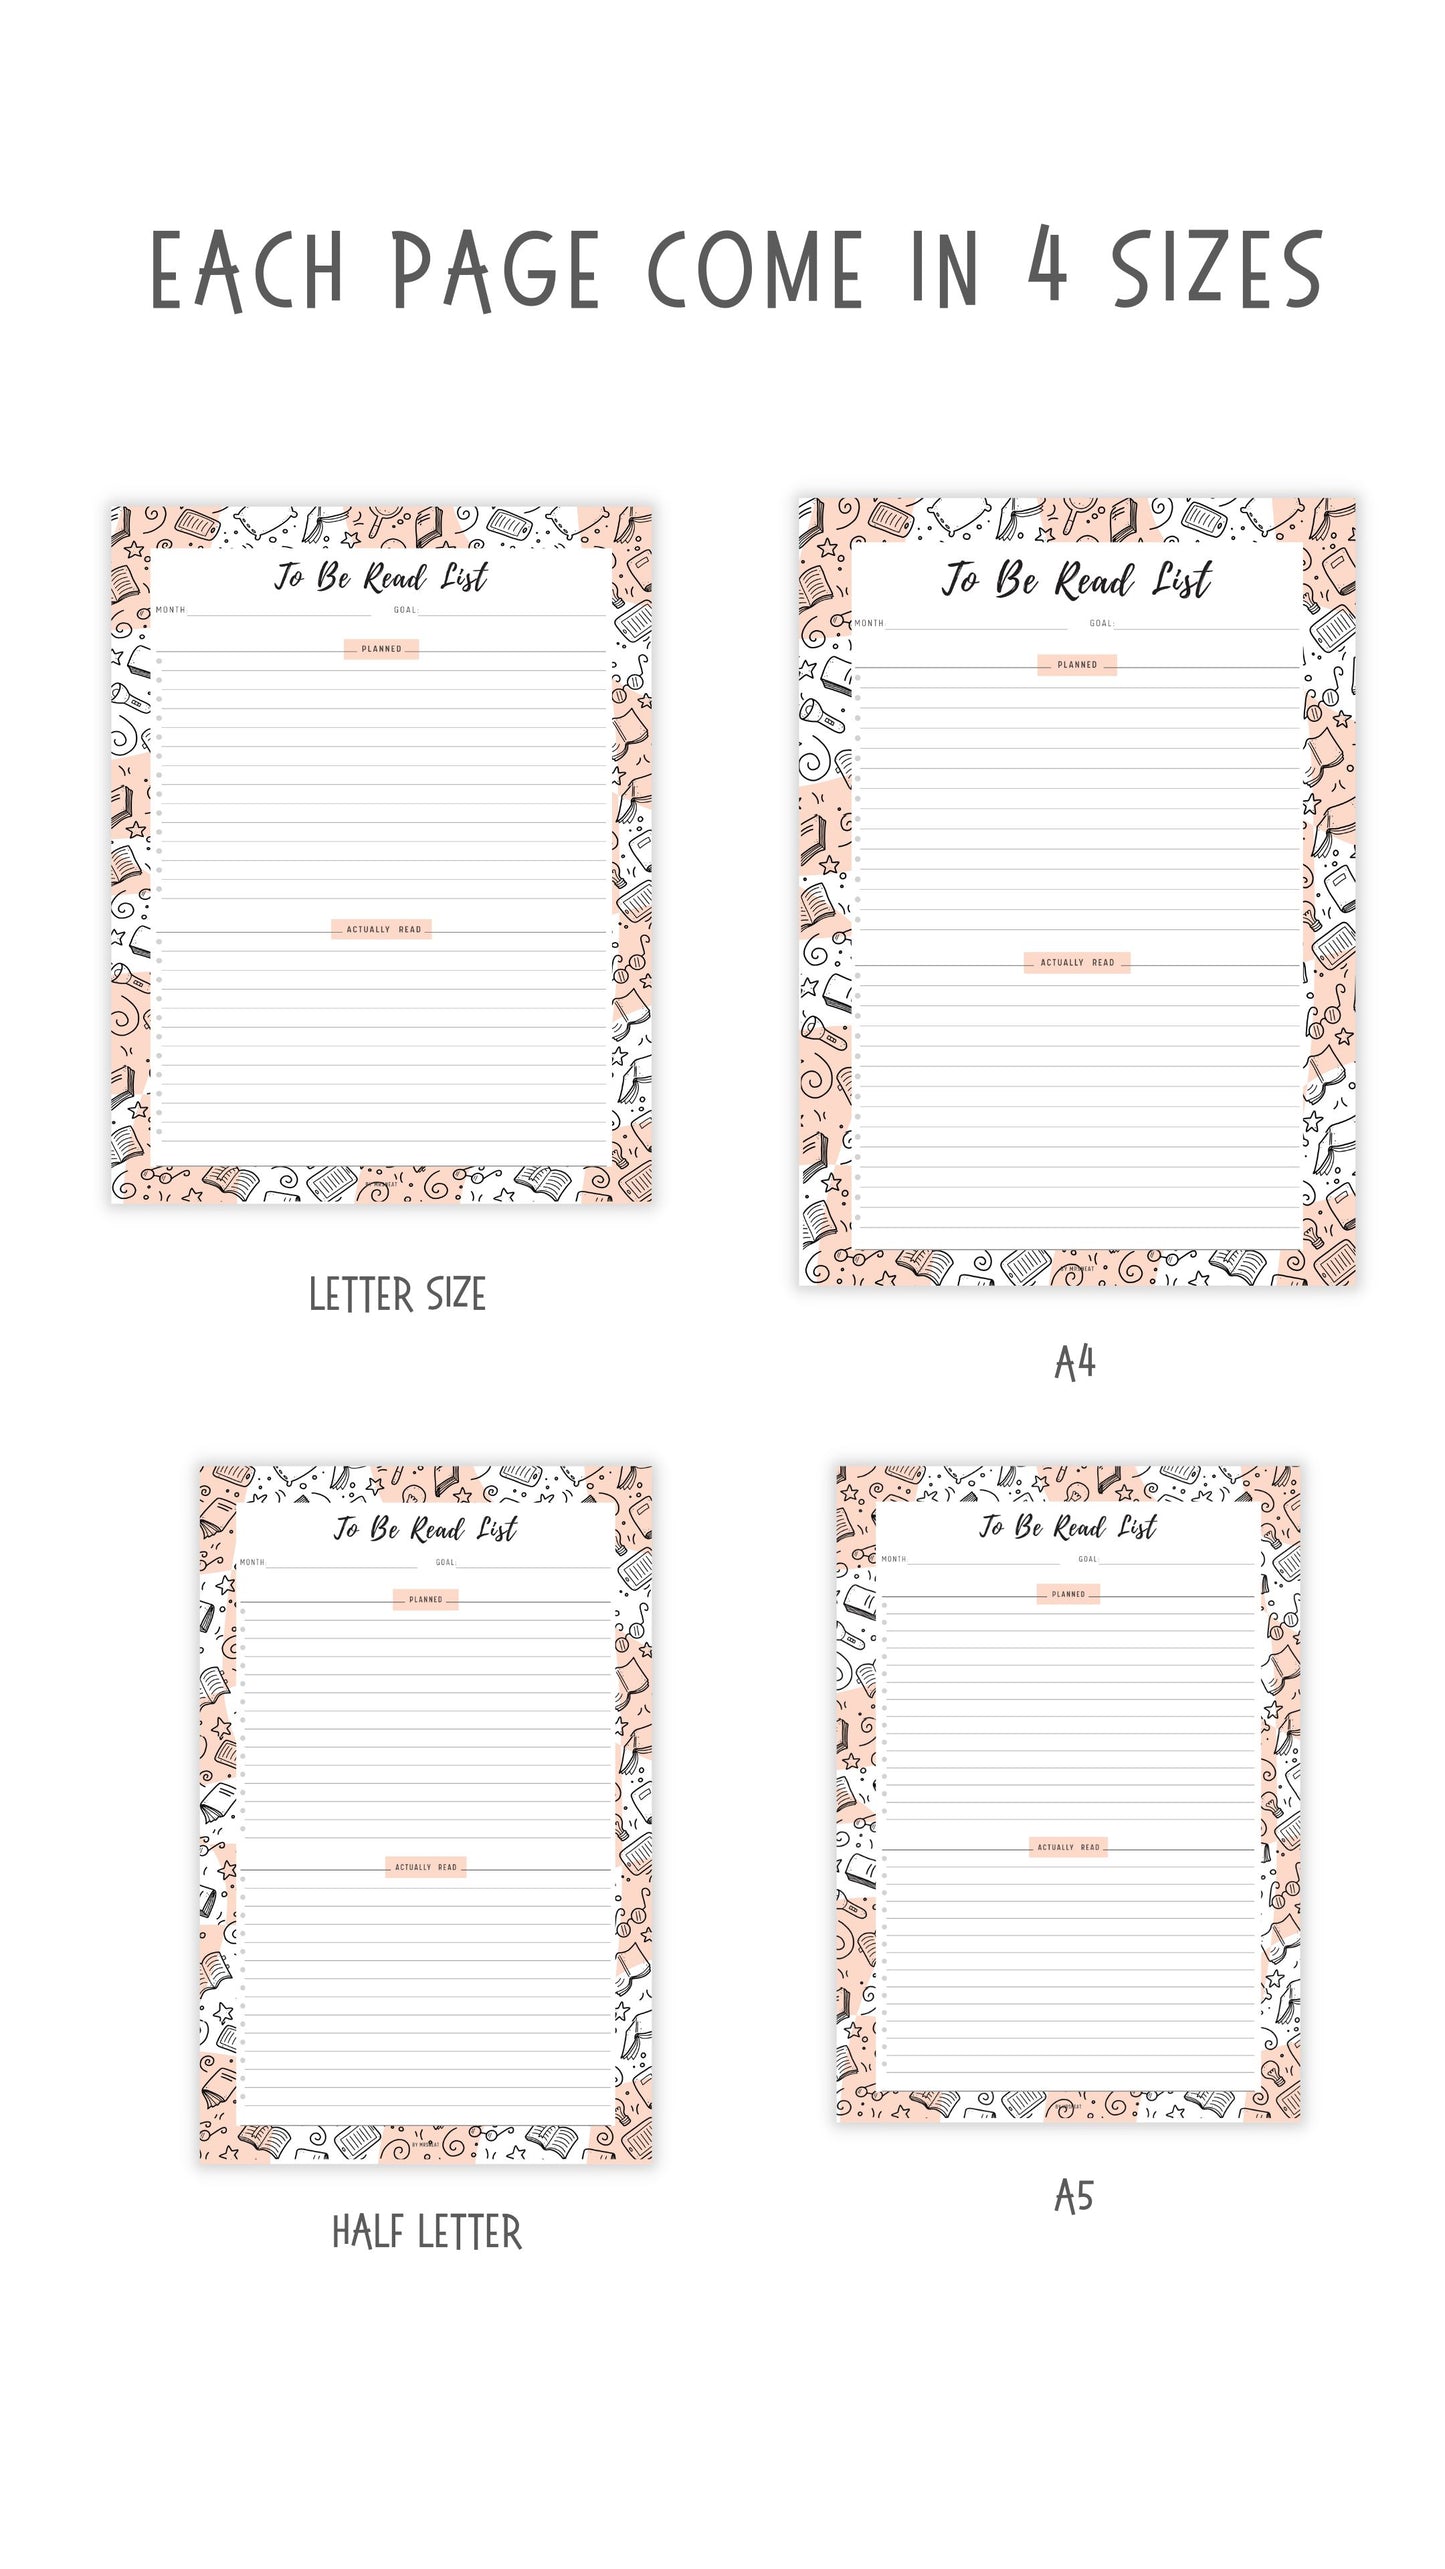 To Be Read List Template Printable, 5 colors ; Peach, Pink, Blue, Green, Neutral, 4 sizes ; A4, A5, Letter, Half Letter, Digital Planner